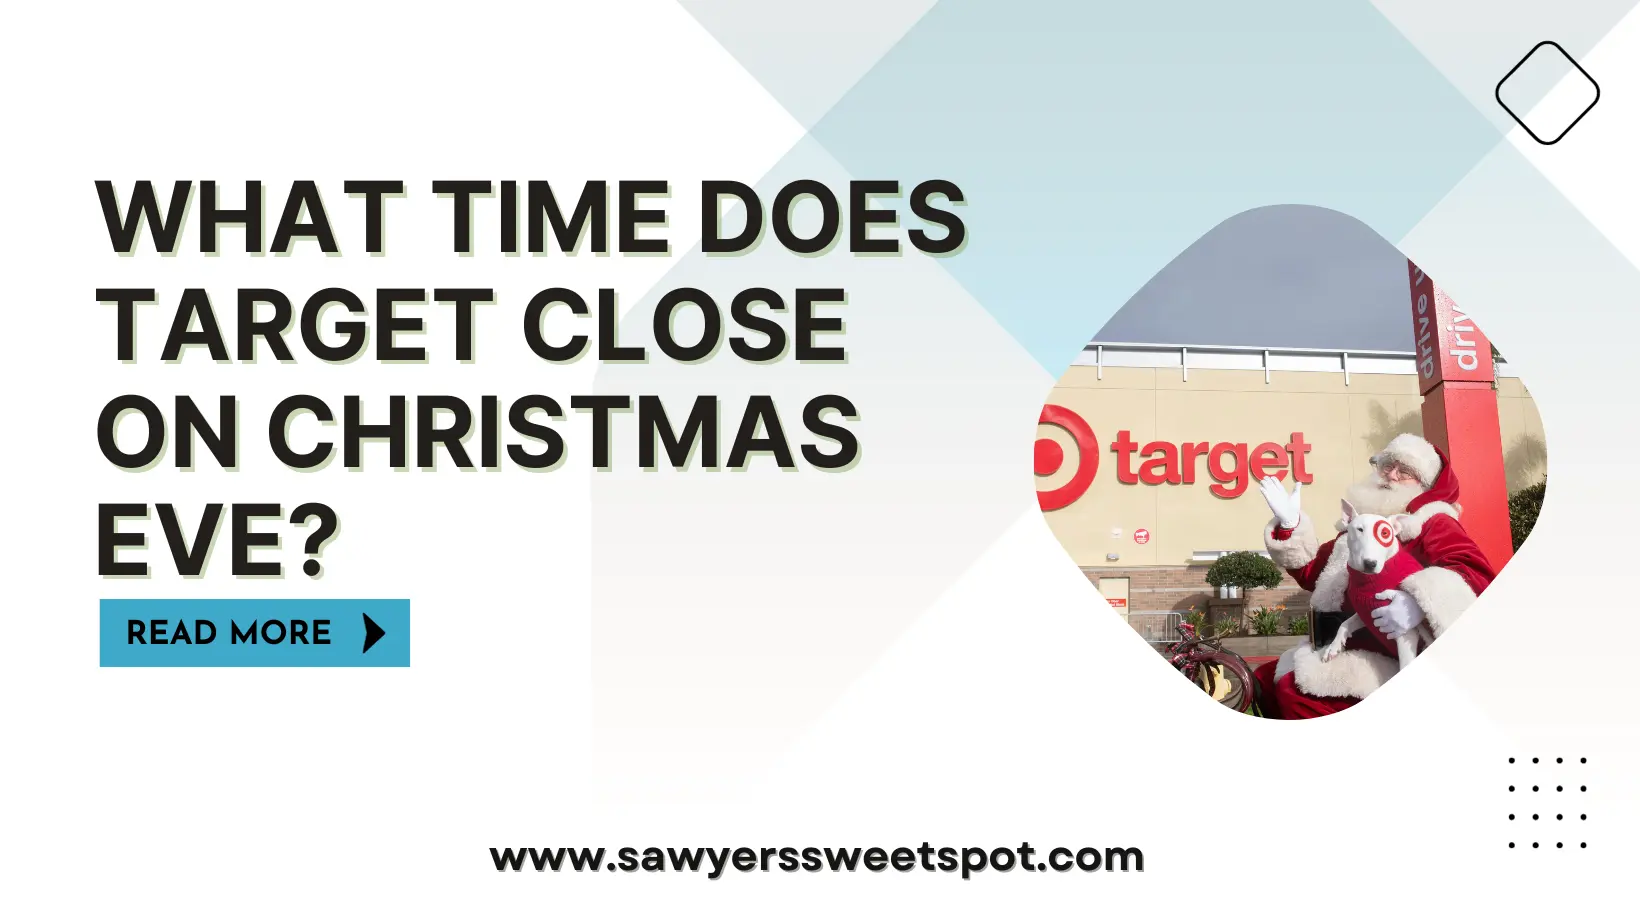 What Time Does Target Close on Christmas Eve?